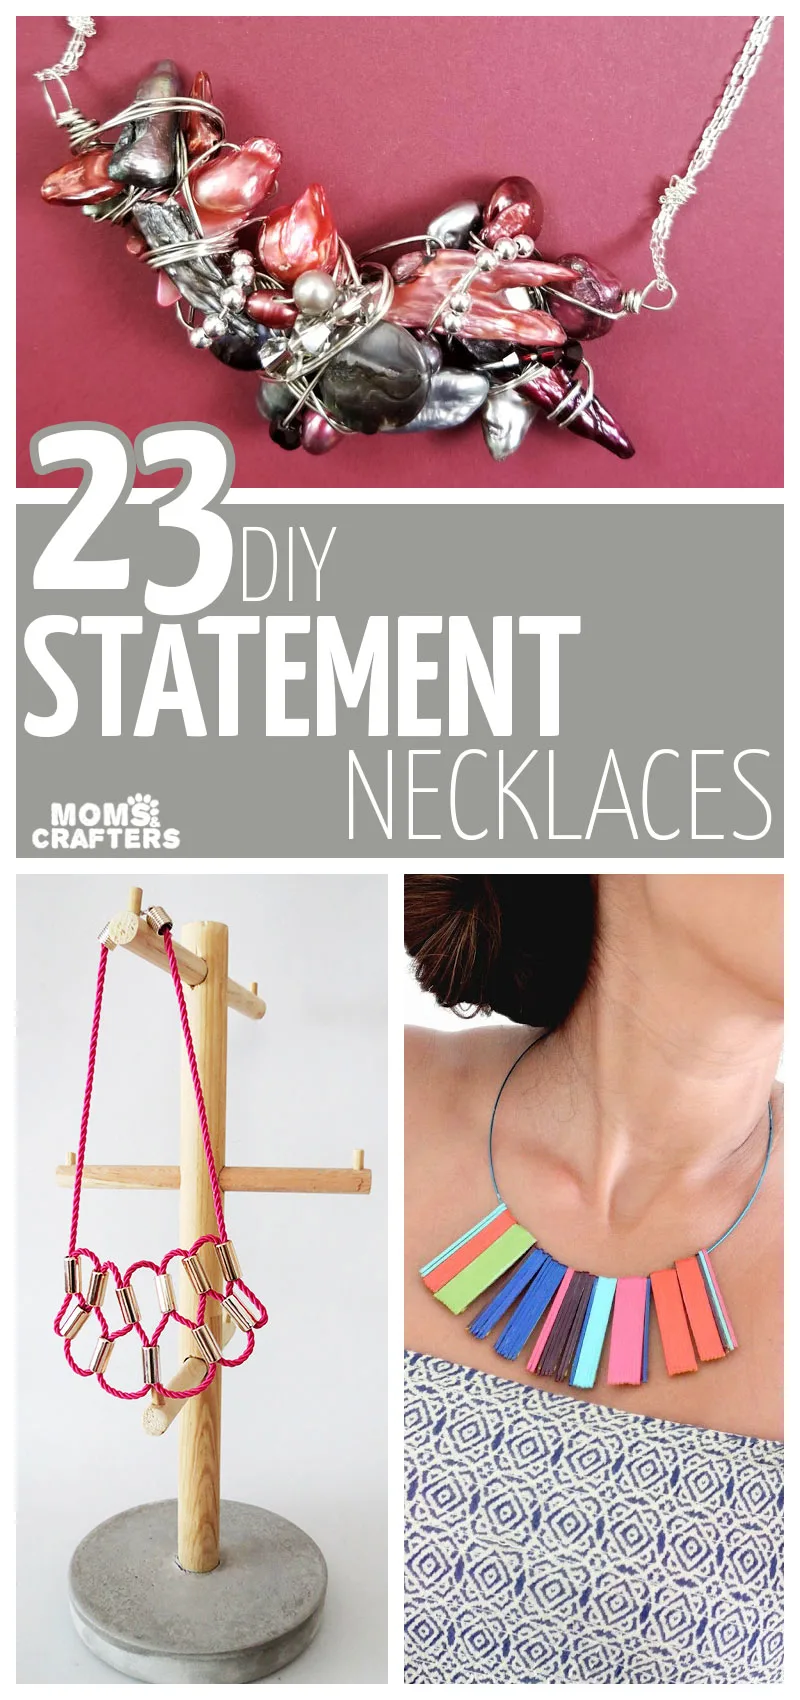 Make these gorgeous DIY statement necklace projects! This list includes fresh ideas for everyone - easy jewelry making ideas for beginners, cool trendy projects for teens, and more!